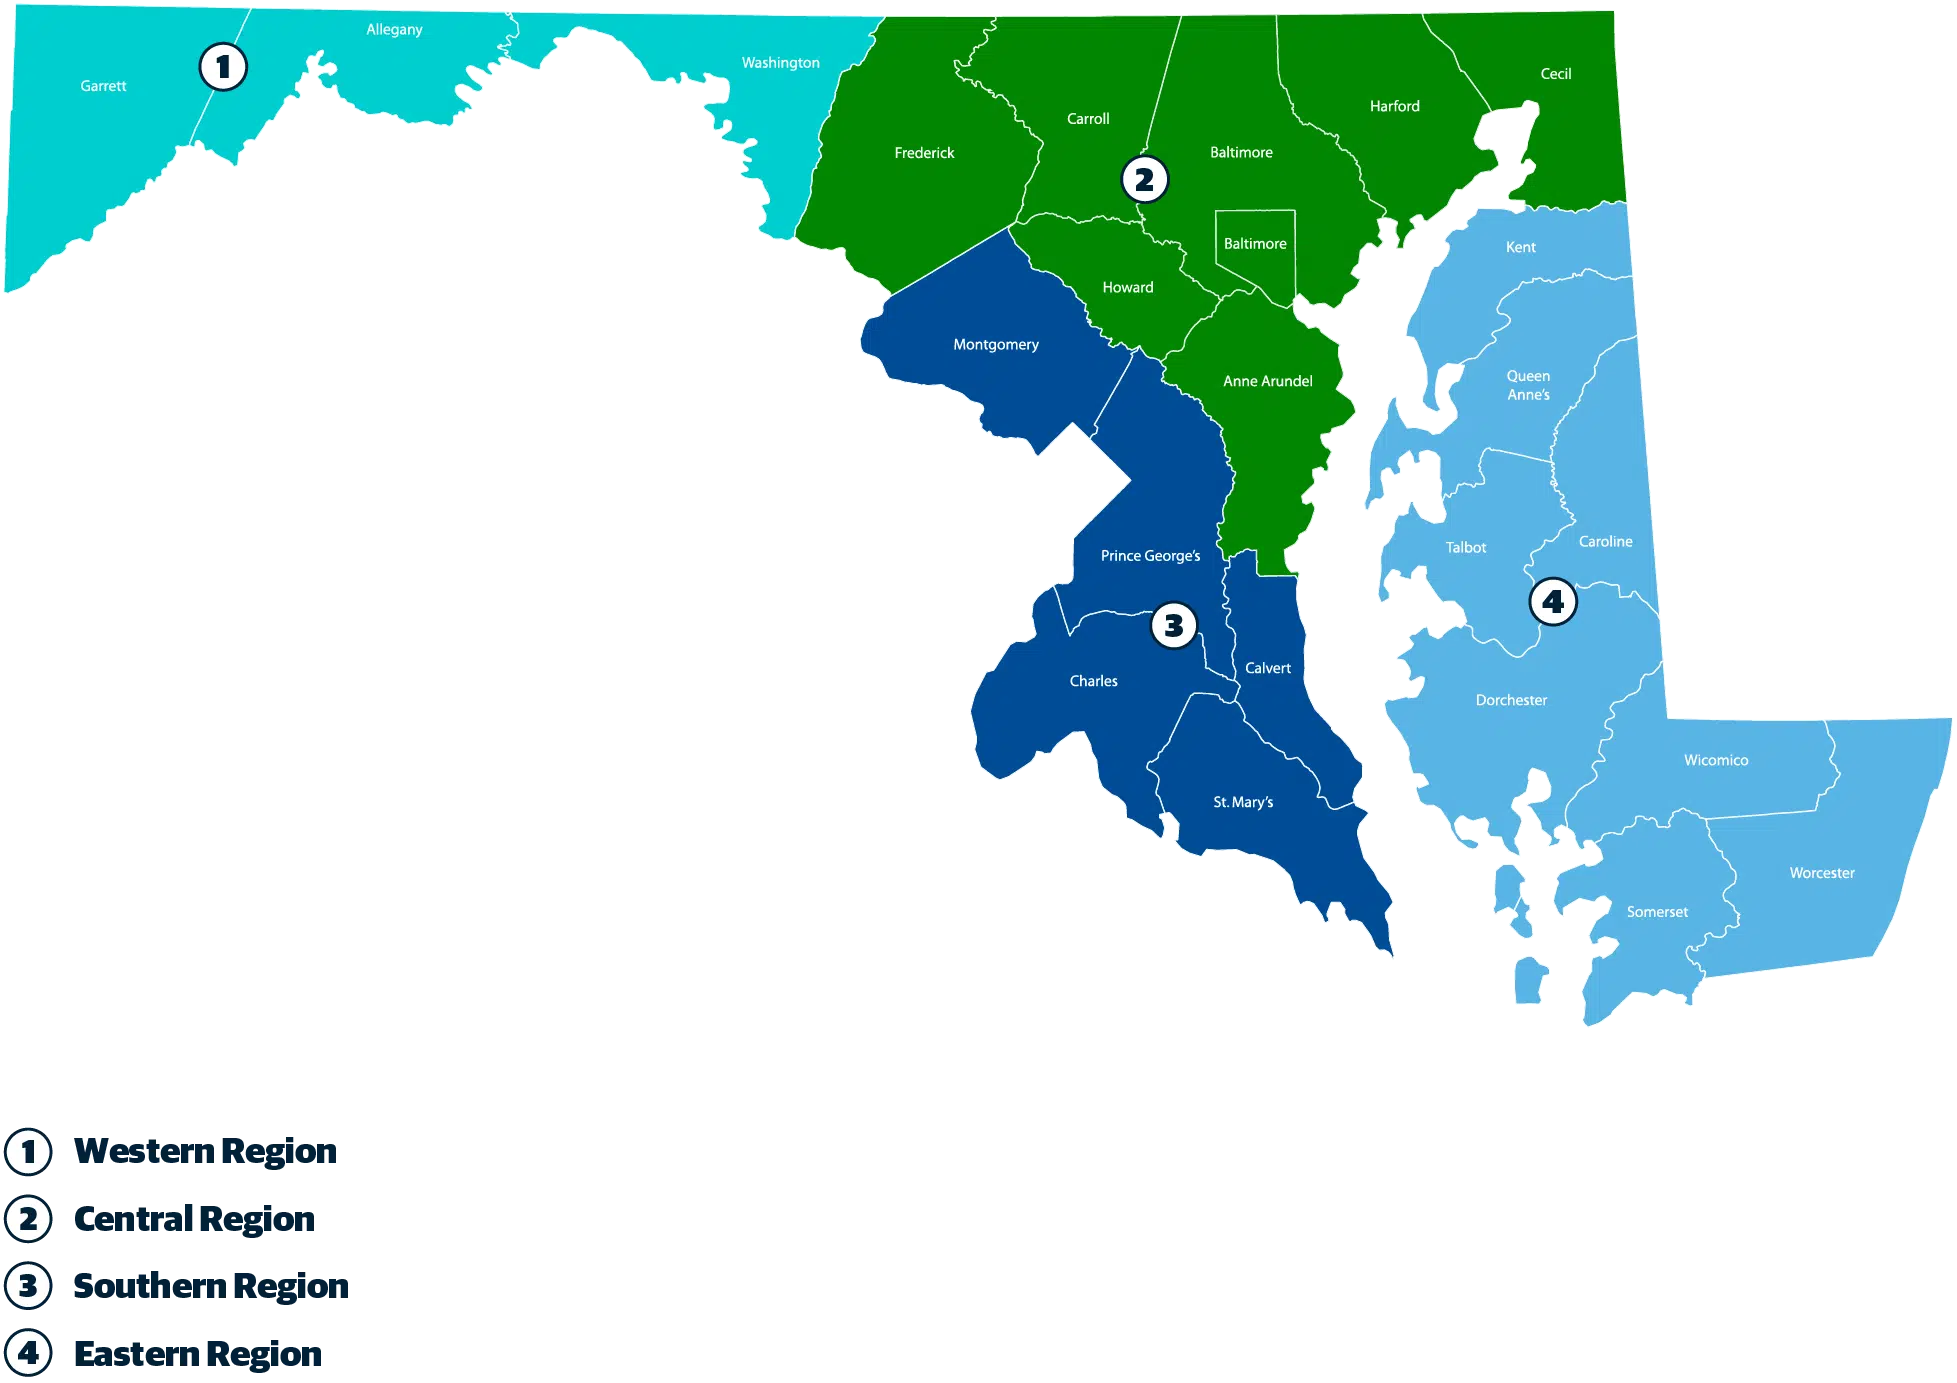 Maryland DGS Contractor Service Map